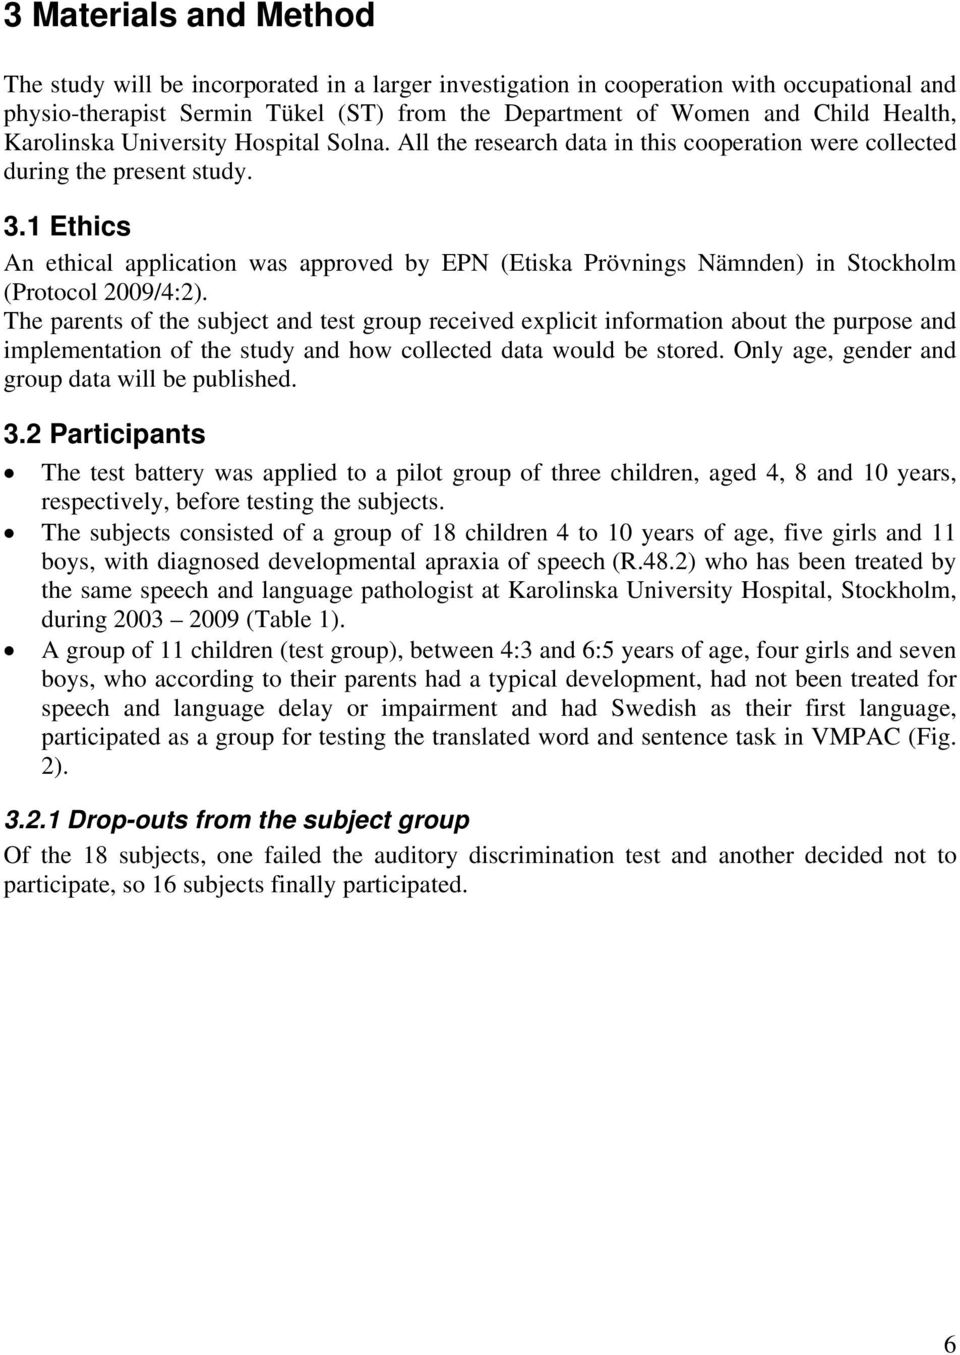 1 Ethics An ethical application was approved by EPN (Etiska Prövnings Nämnden) in Stockholm (Protocol 2009/4:2).